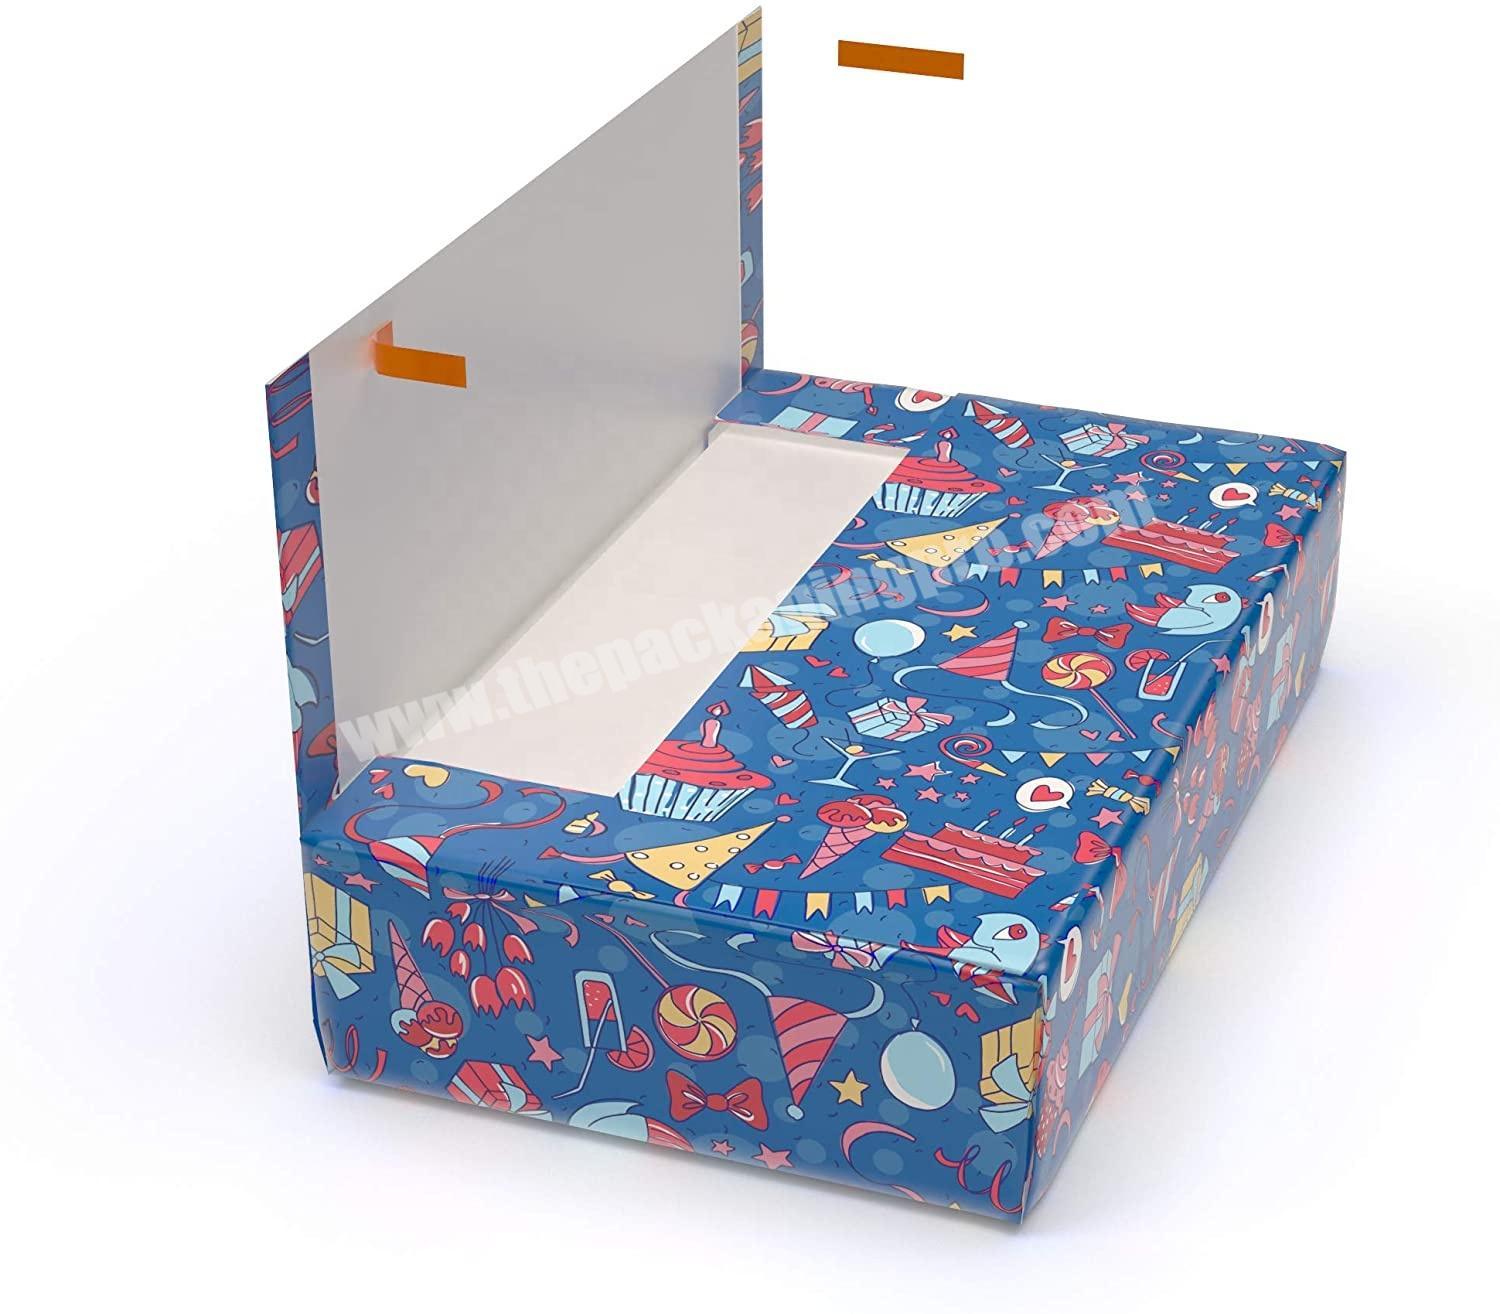 Blue Gift box for Birthday gift such as shirts, jeans, sweaters, pajamas books, tablets, electronics